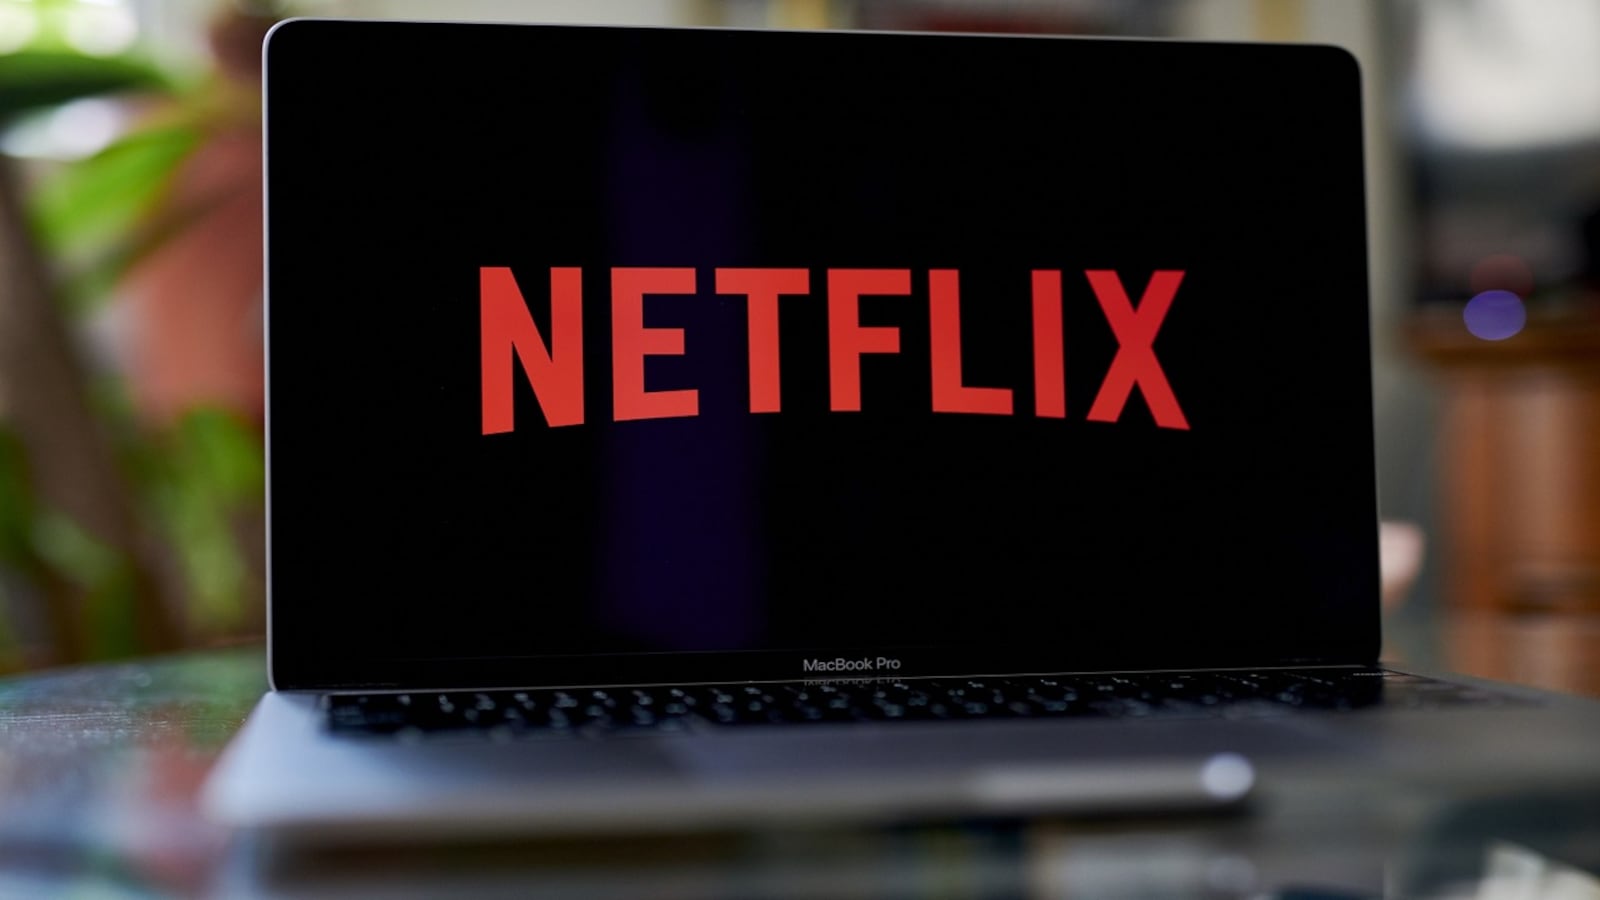 Netflix's crackdown on password sharing to begin by early 2023: Report